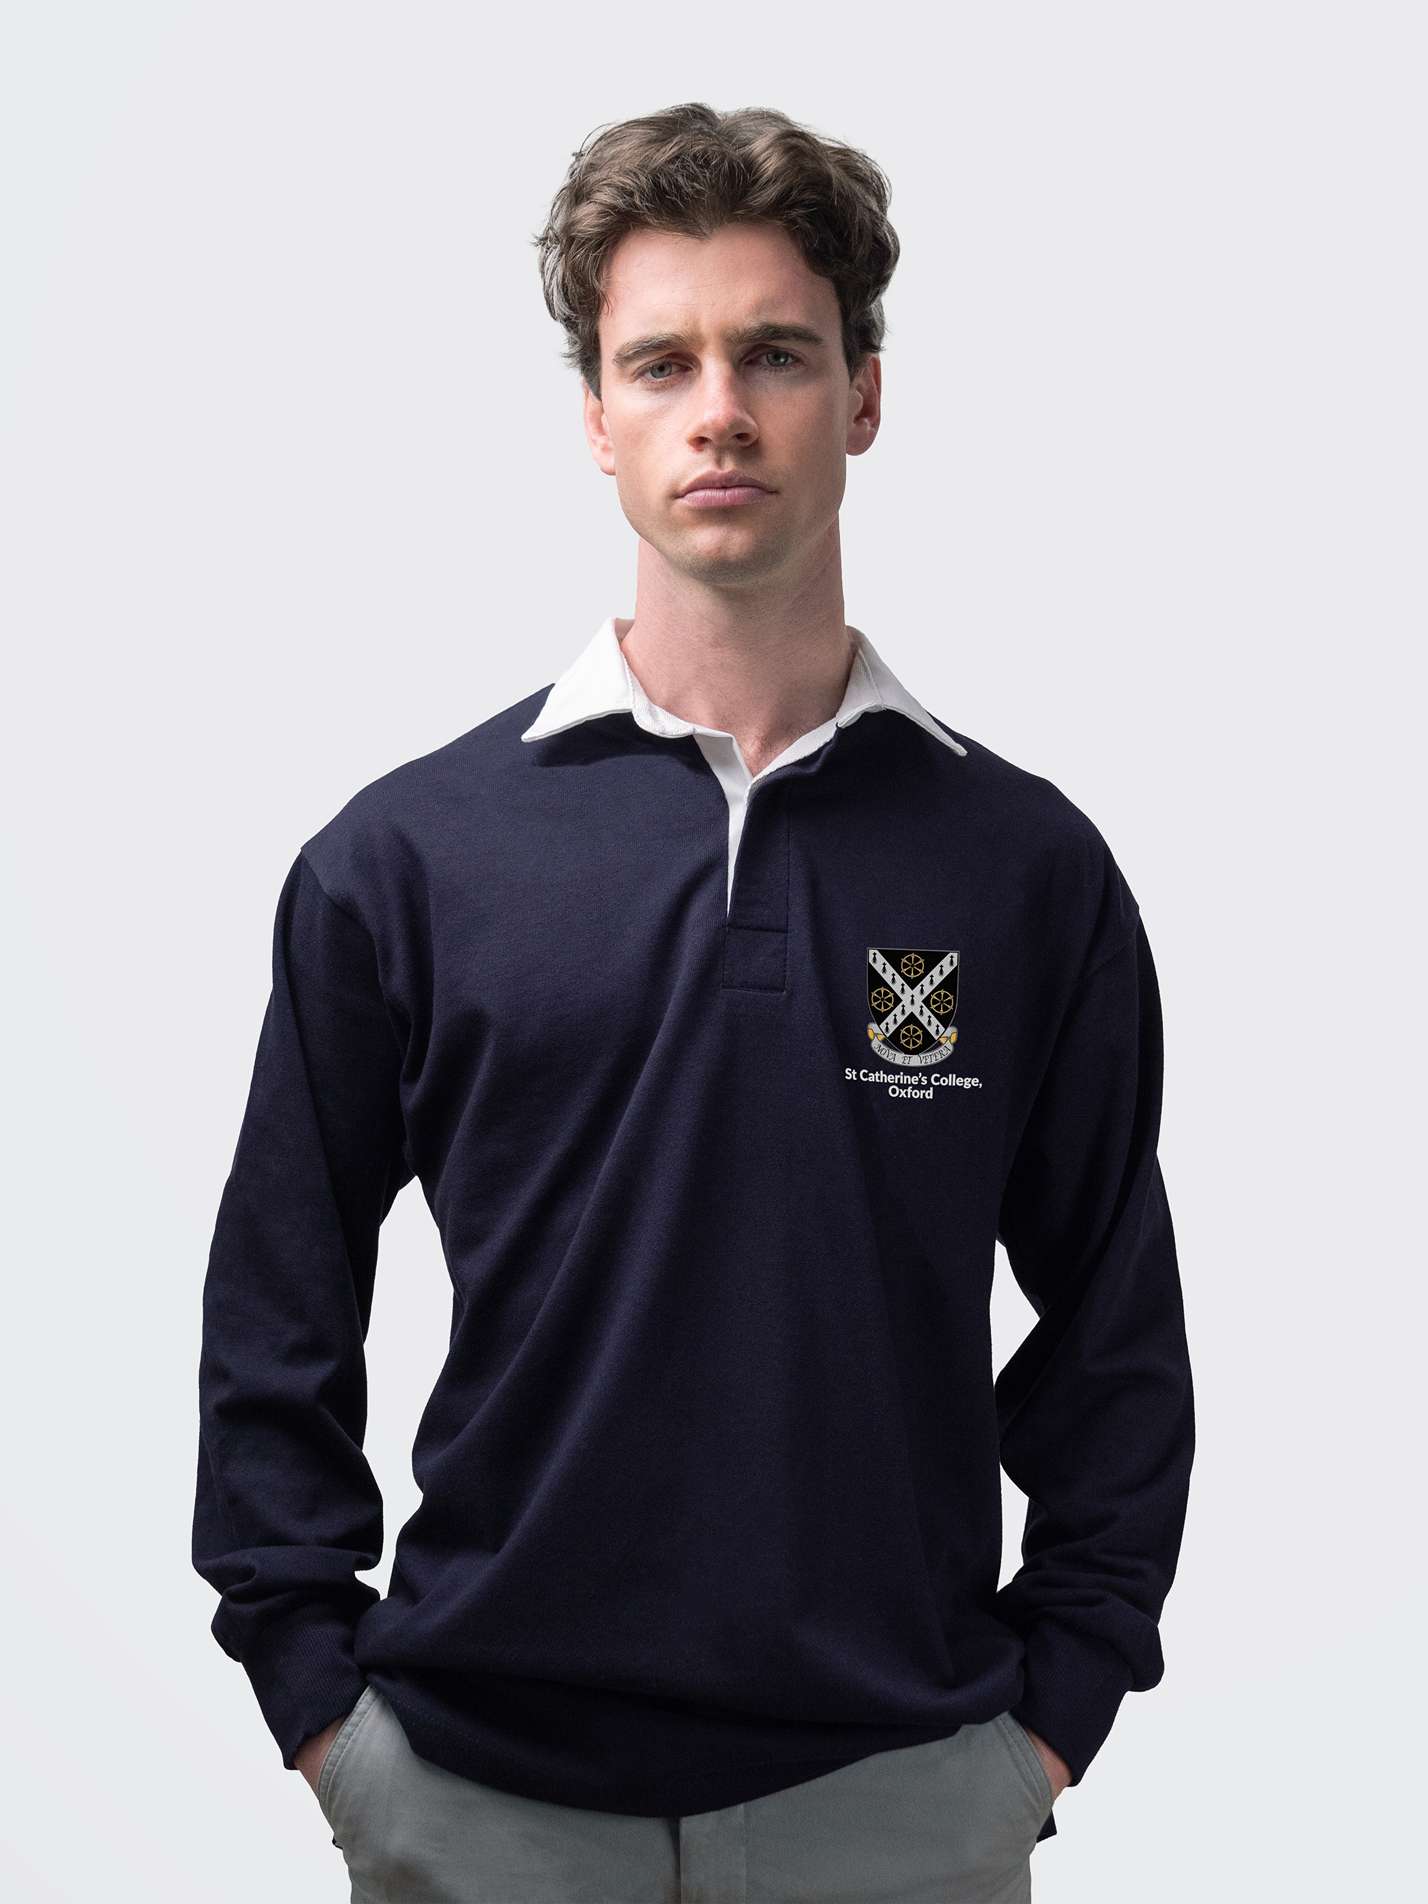 St Catherine's College student wearing an embroidered mens rugby shirt in navy